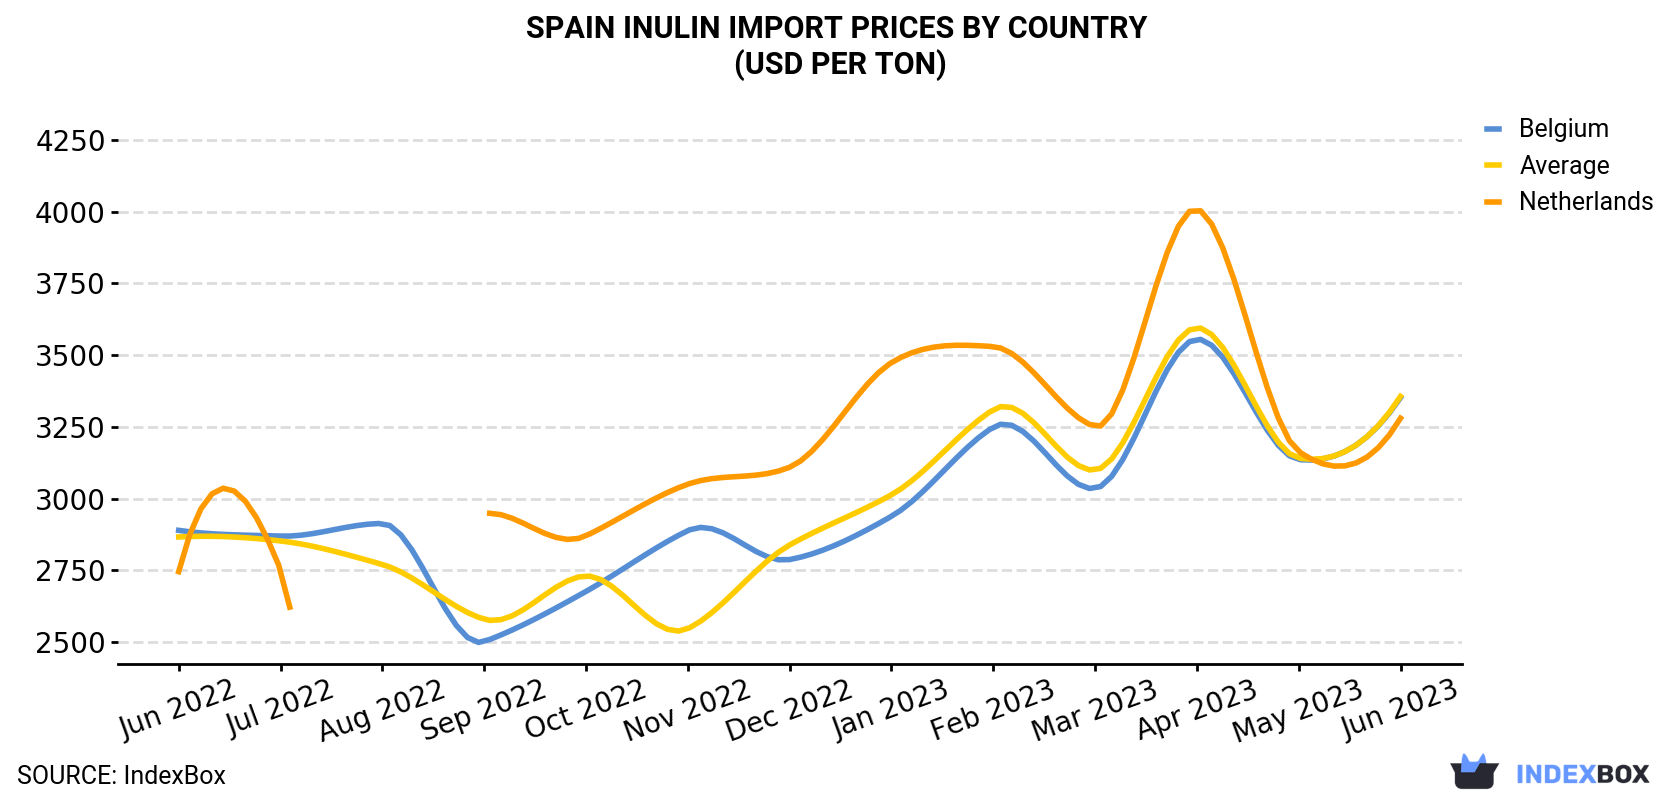 Spain Inulin Import Prices By Country (USD Per Ton)